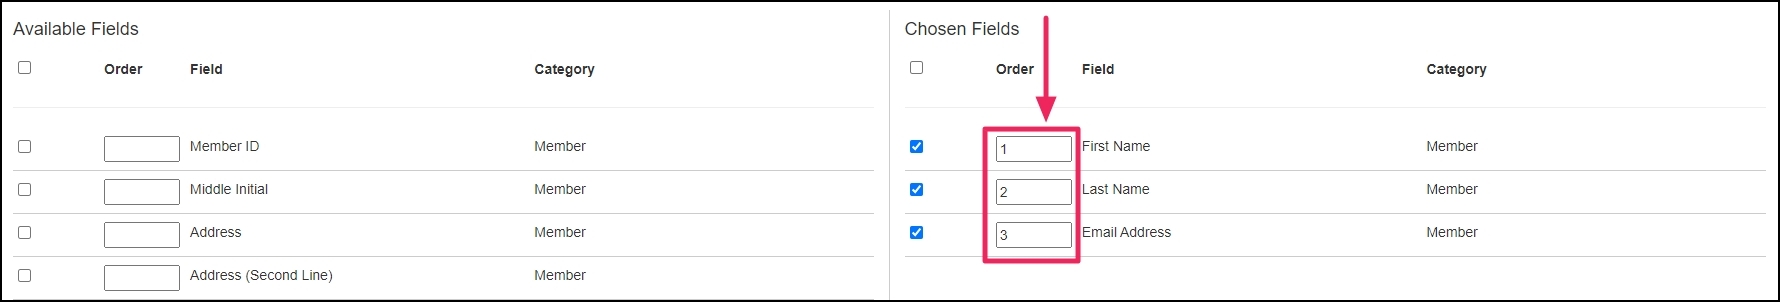 Image of fields in the chosen fields column with an arrow pointing to the field number in the order column